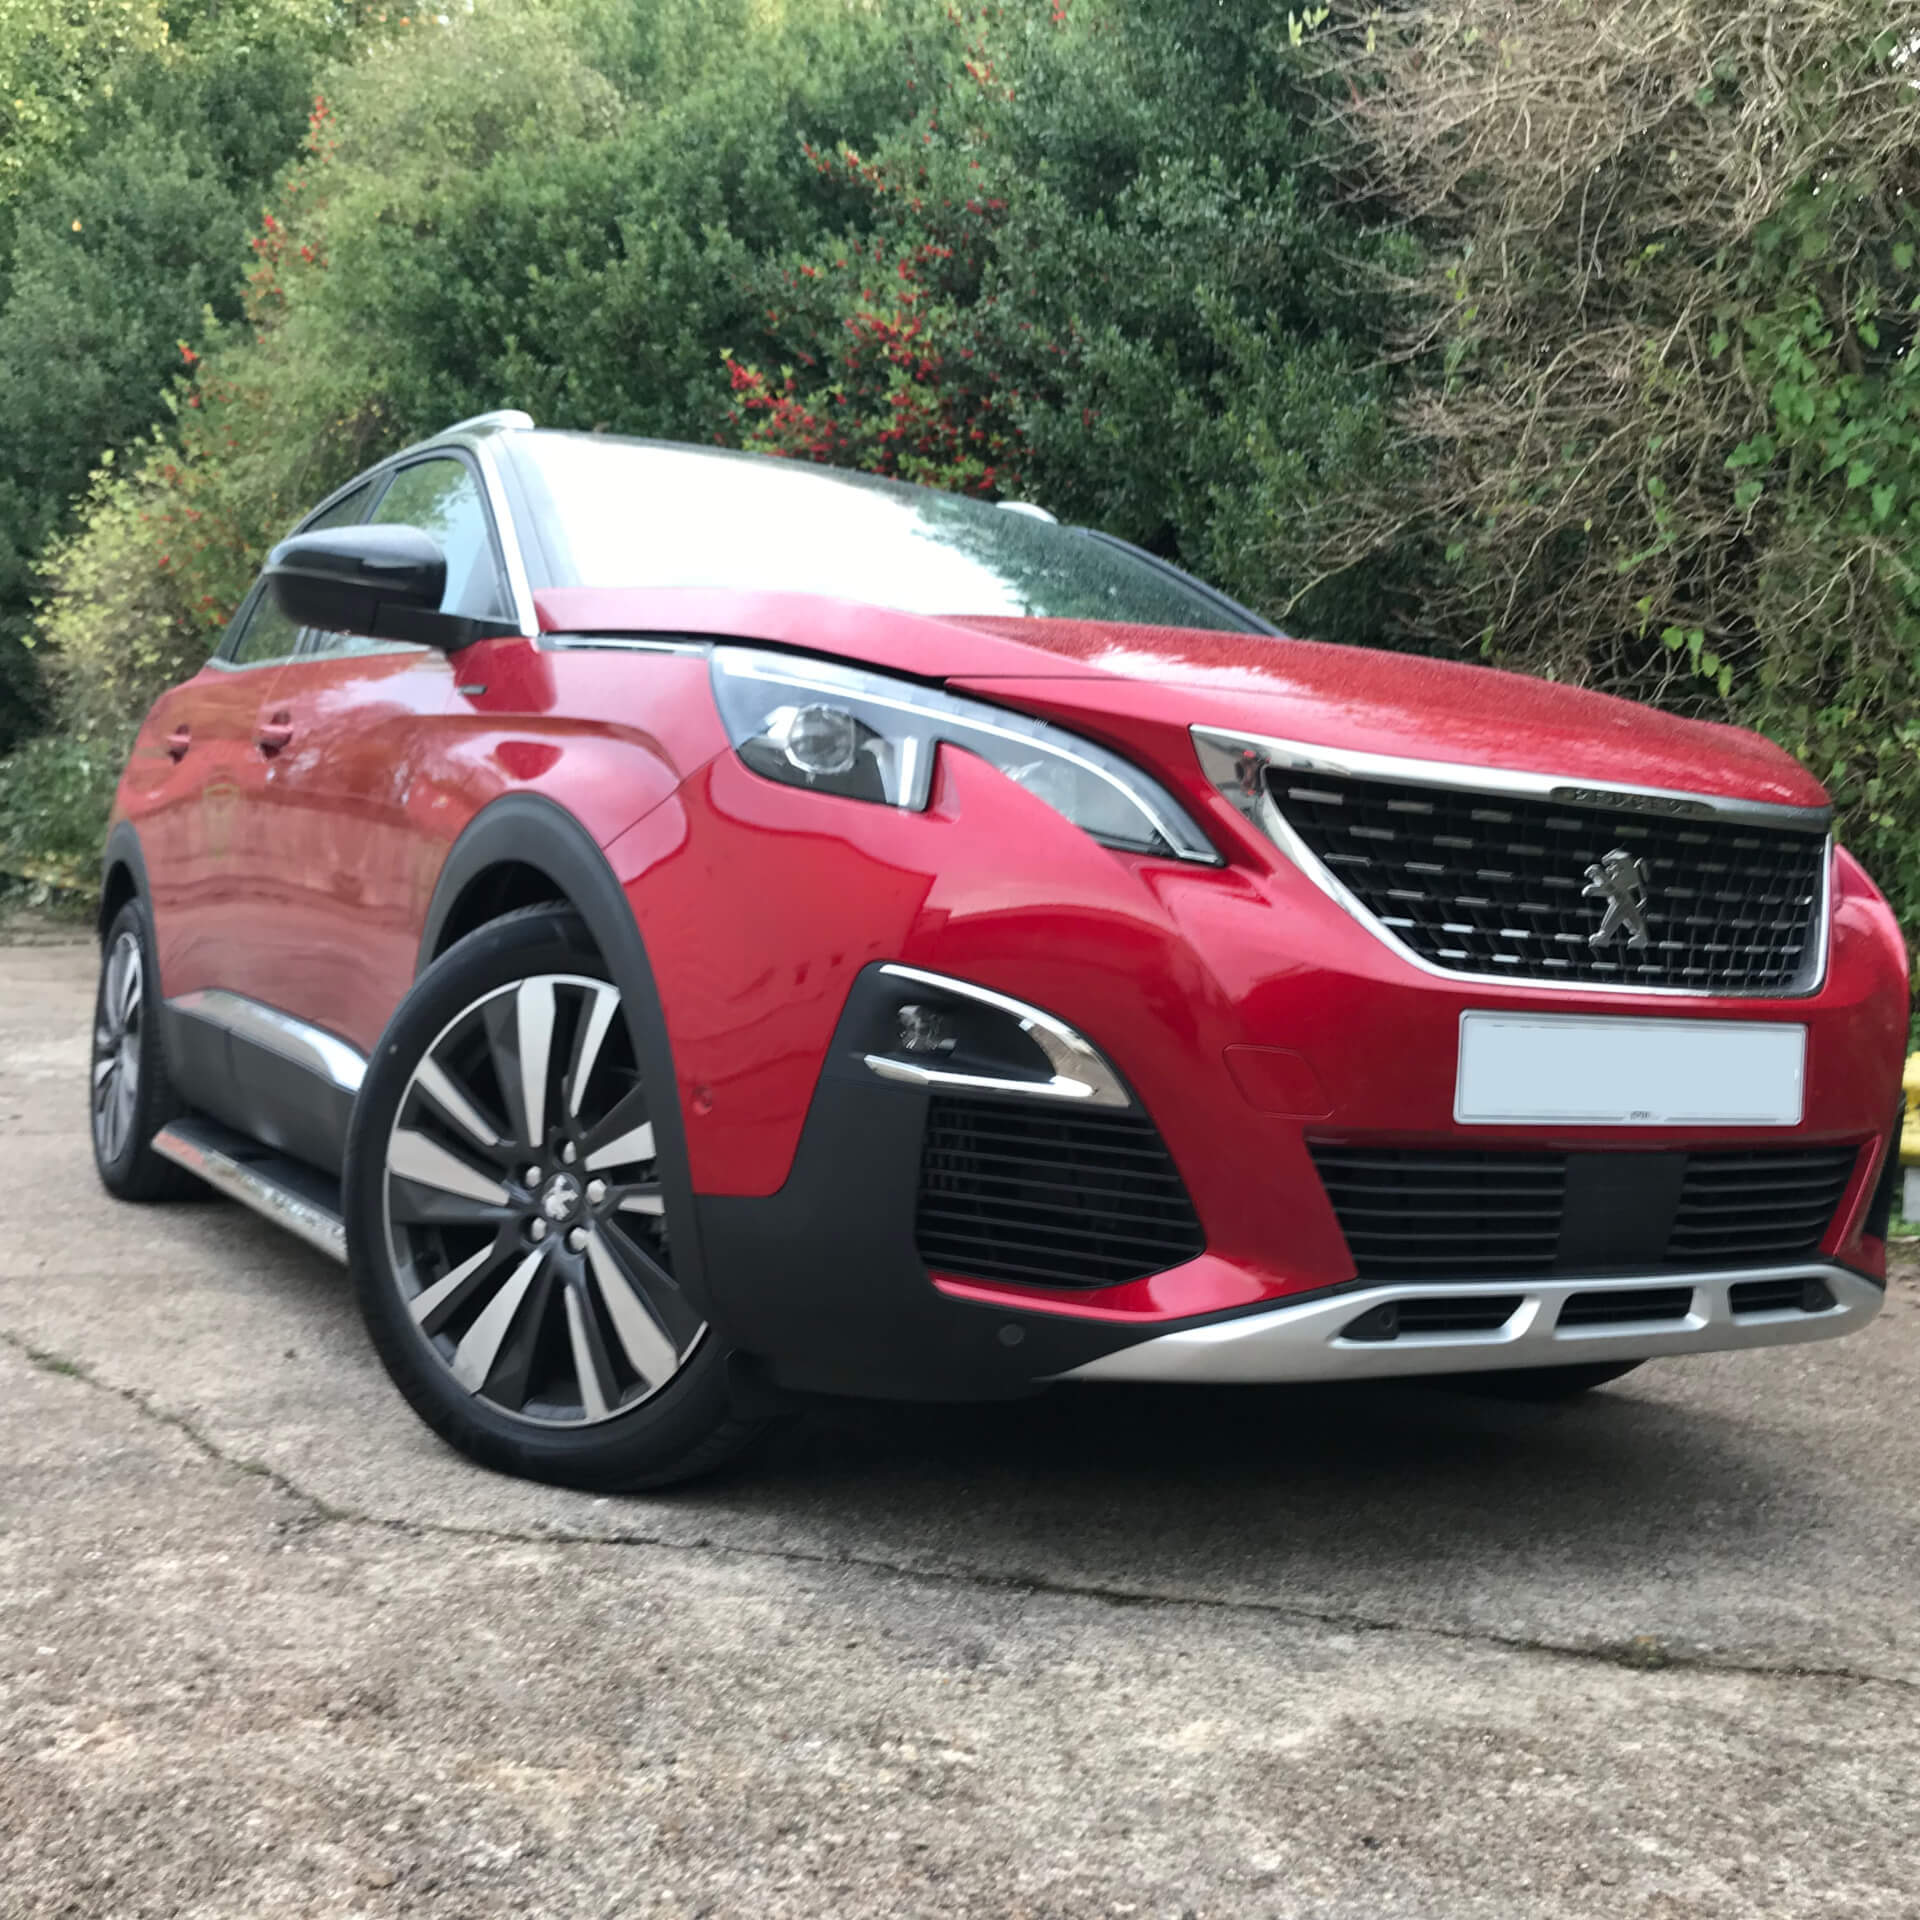 Direct4x4 accessories for Peugeot 5008 vehicles with a photo of a red Peugeot 5008 parked in front of trees